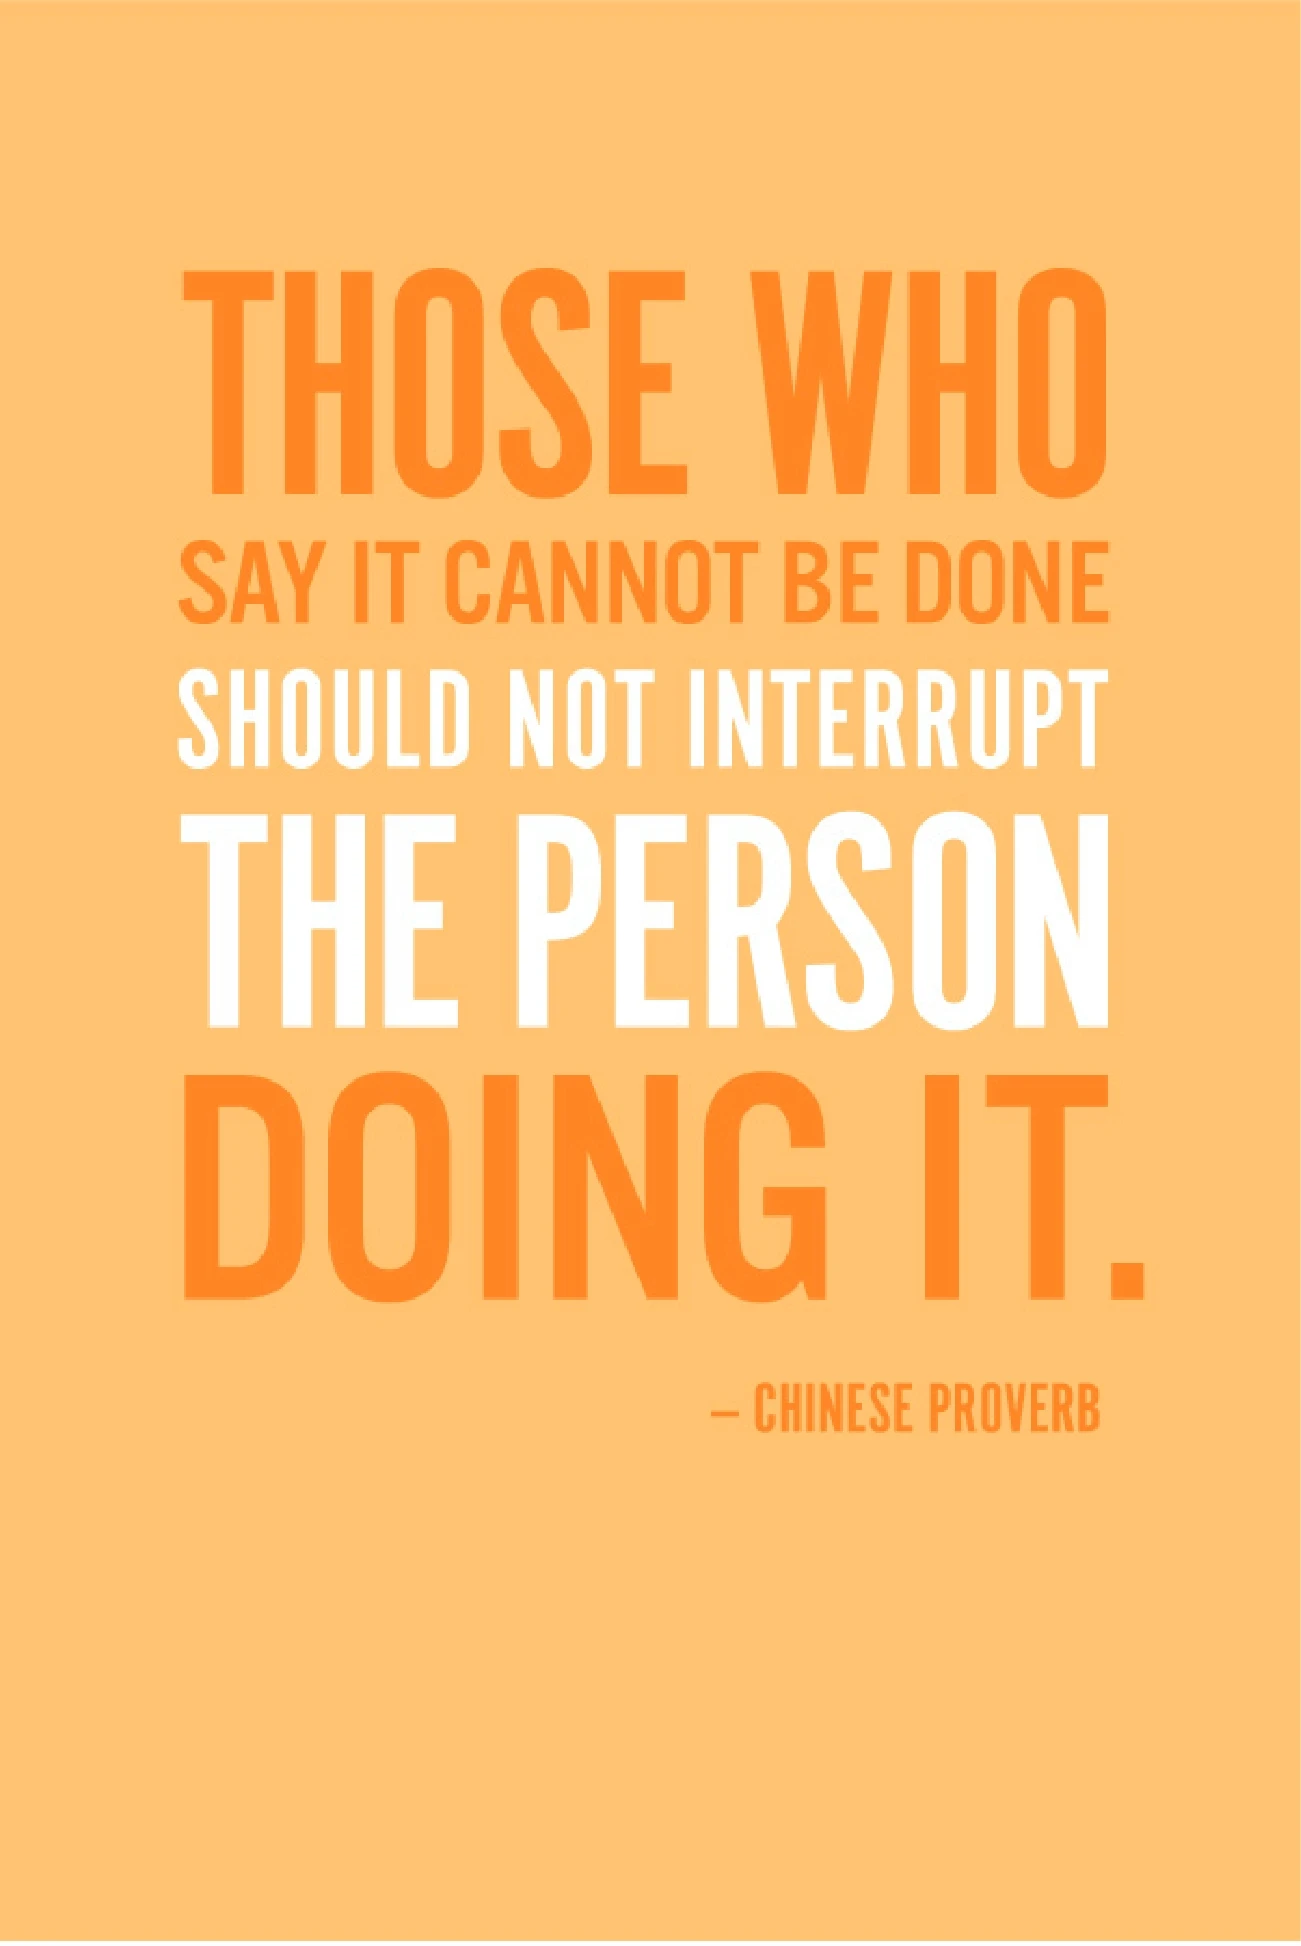 Those who say it can't be done should not interrupt the person doing it.